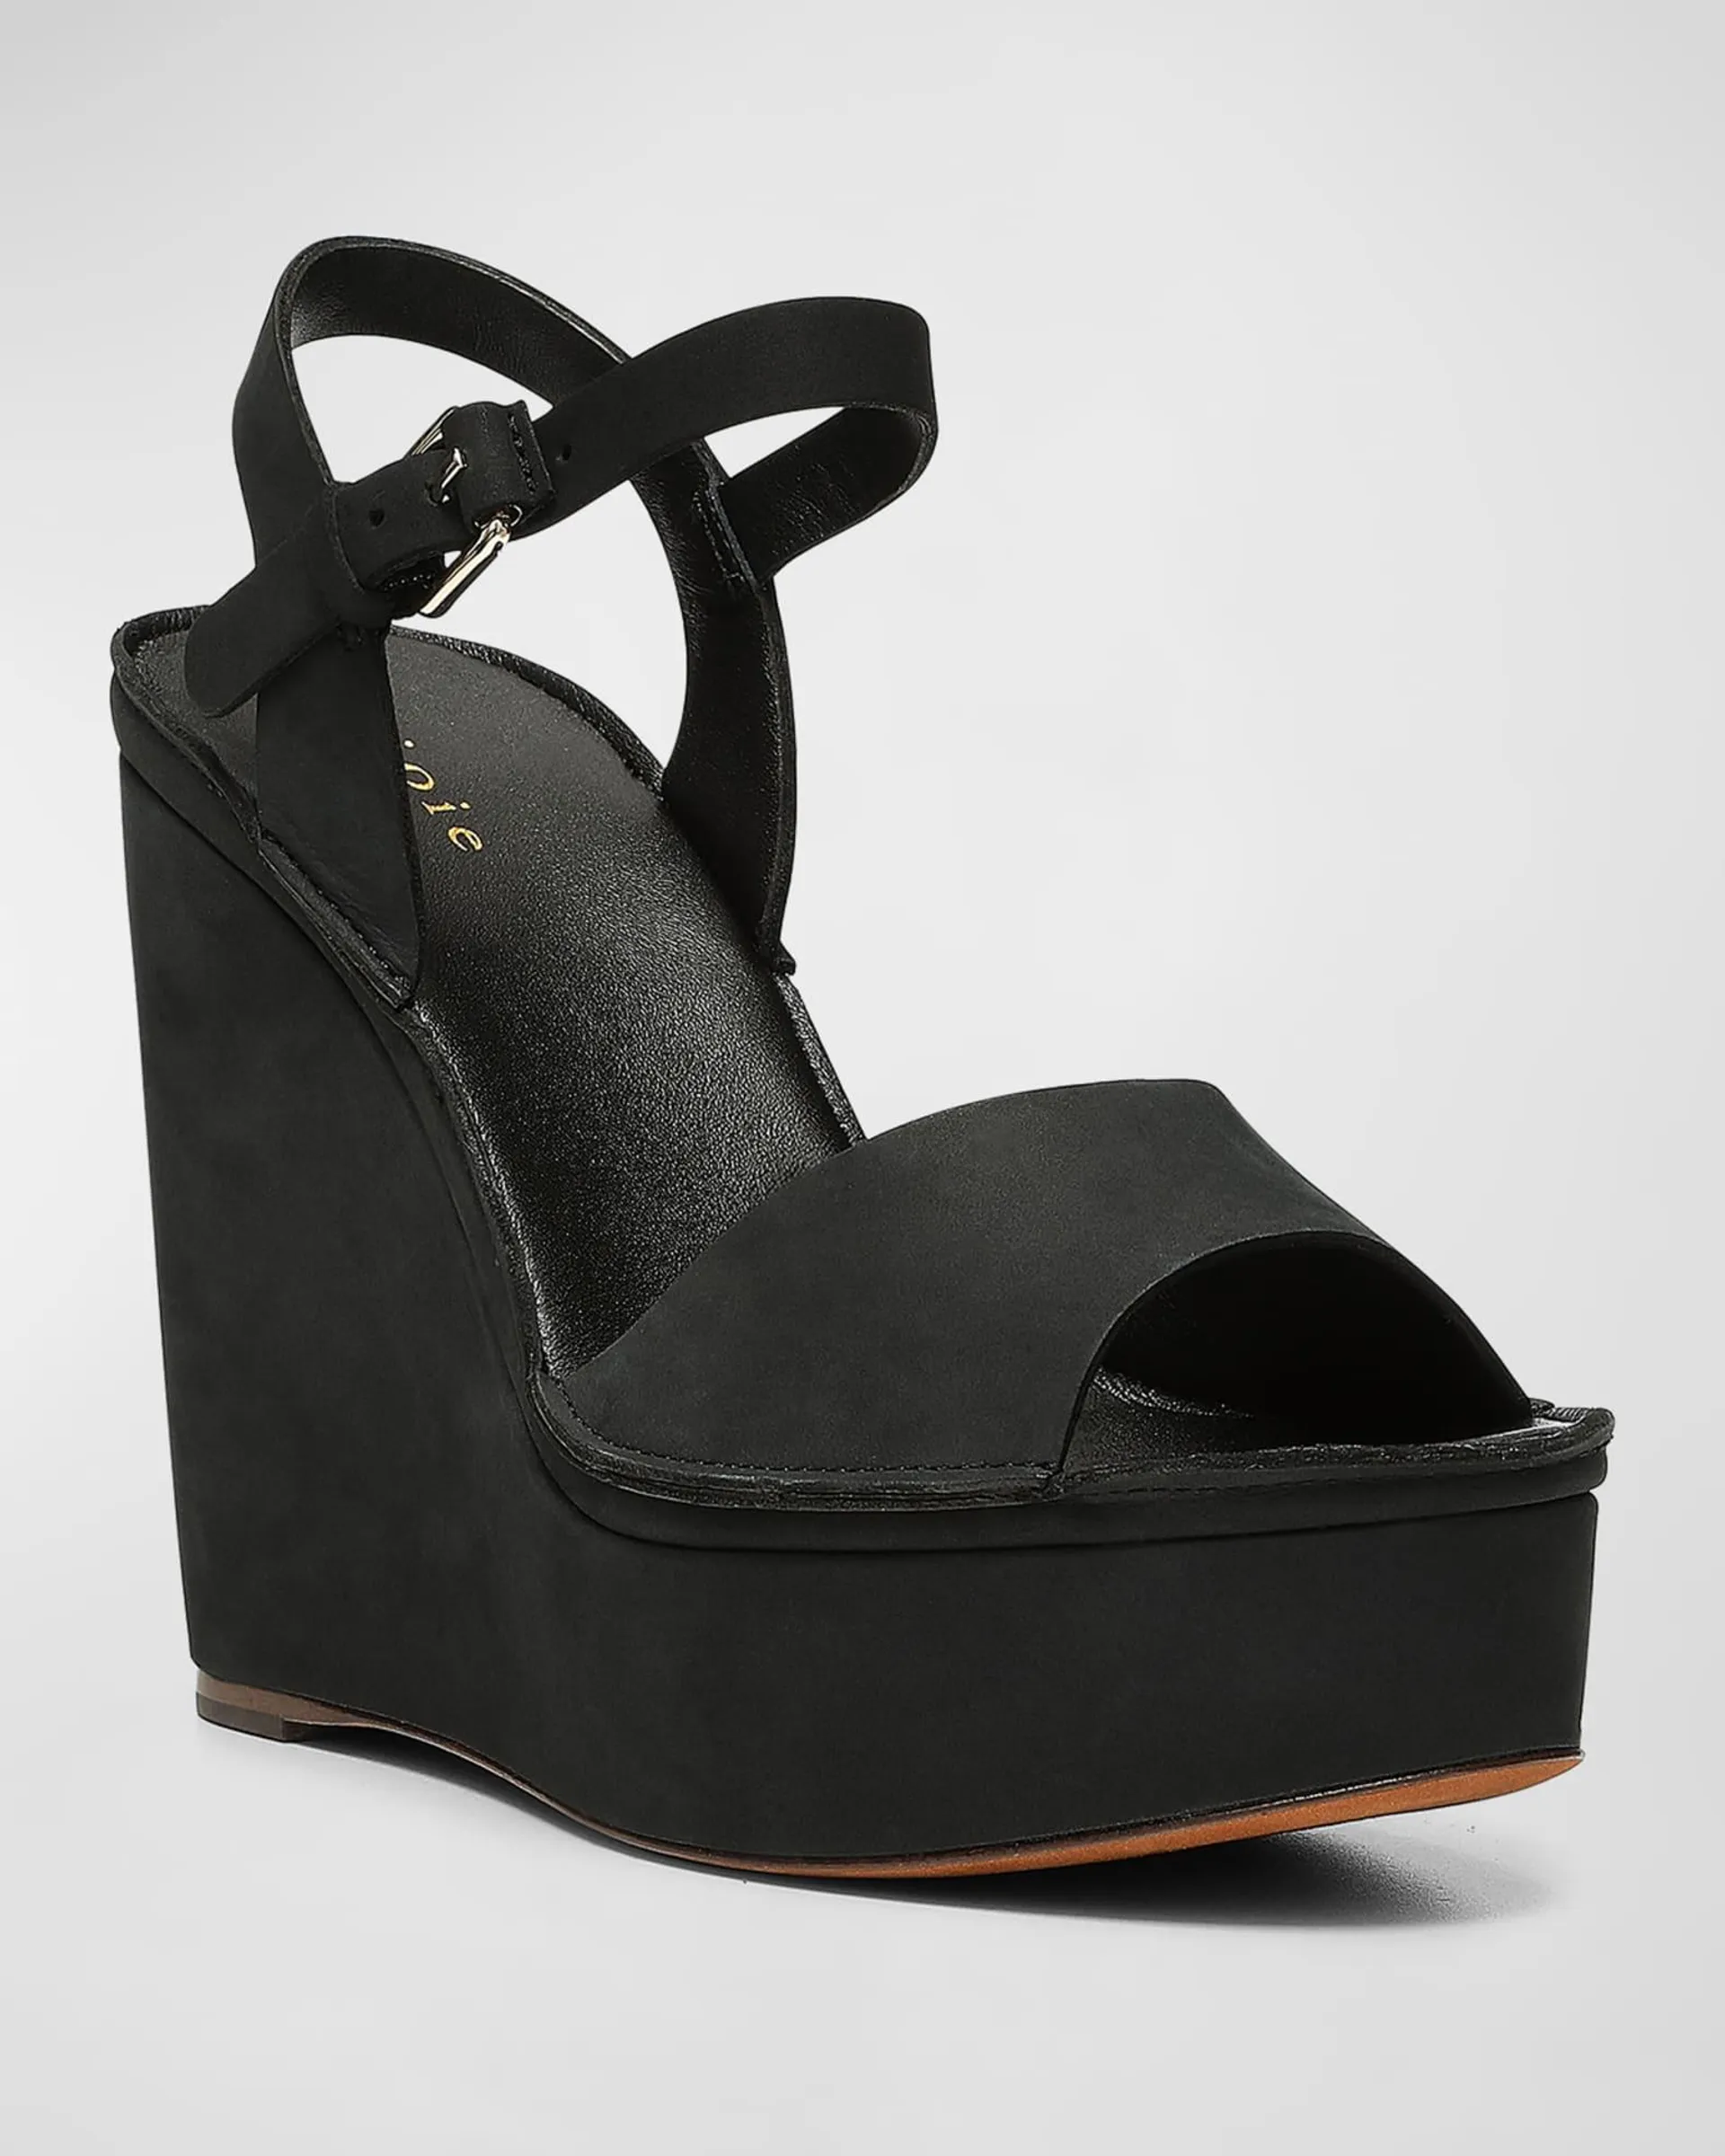 Hindy Suede Ankle-Strap Wedge Sandals